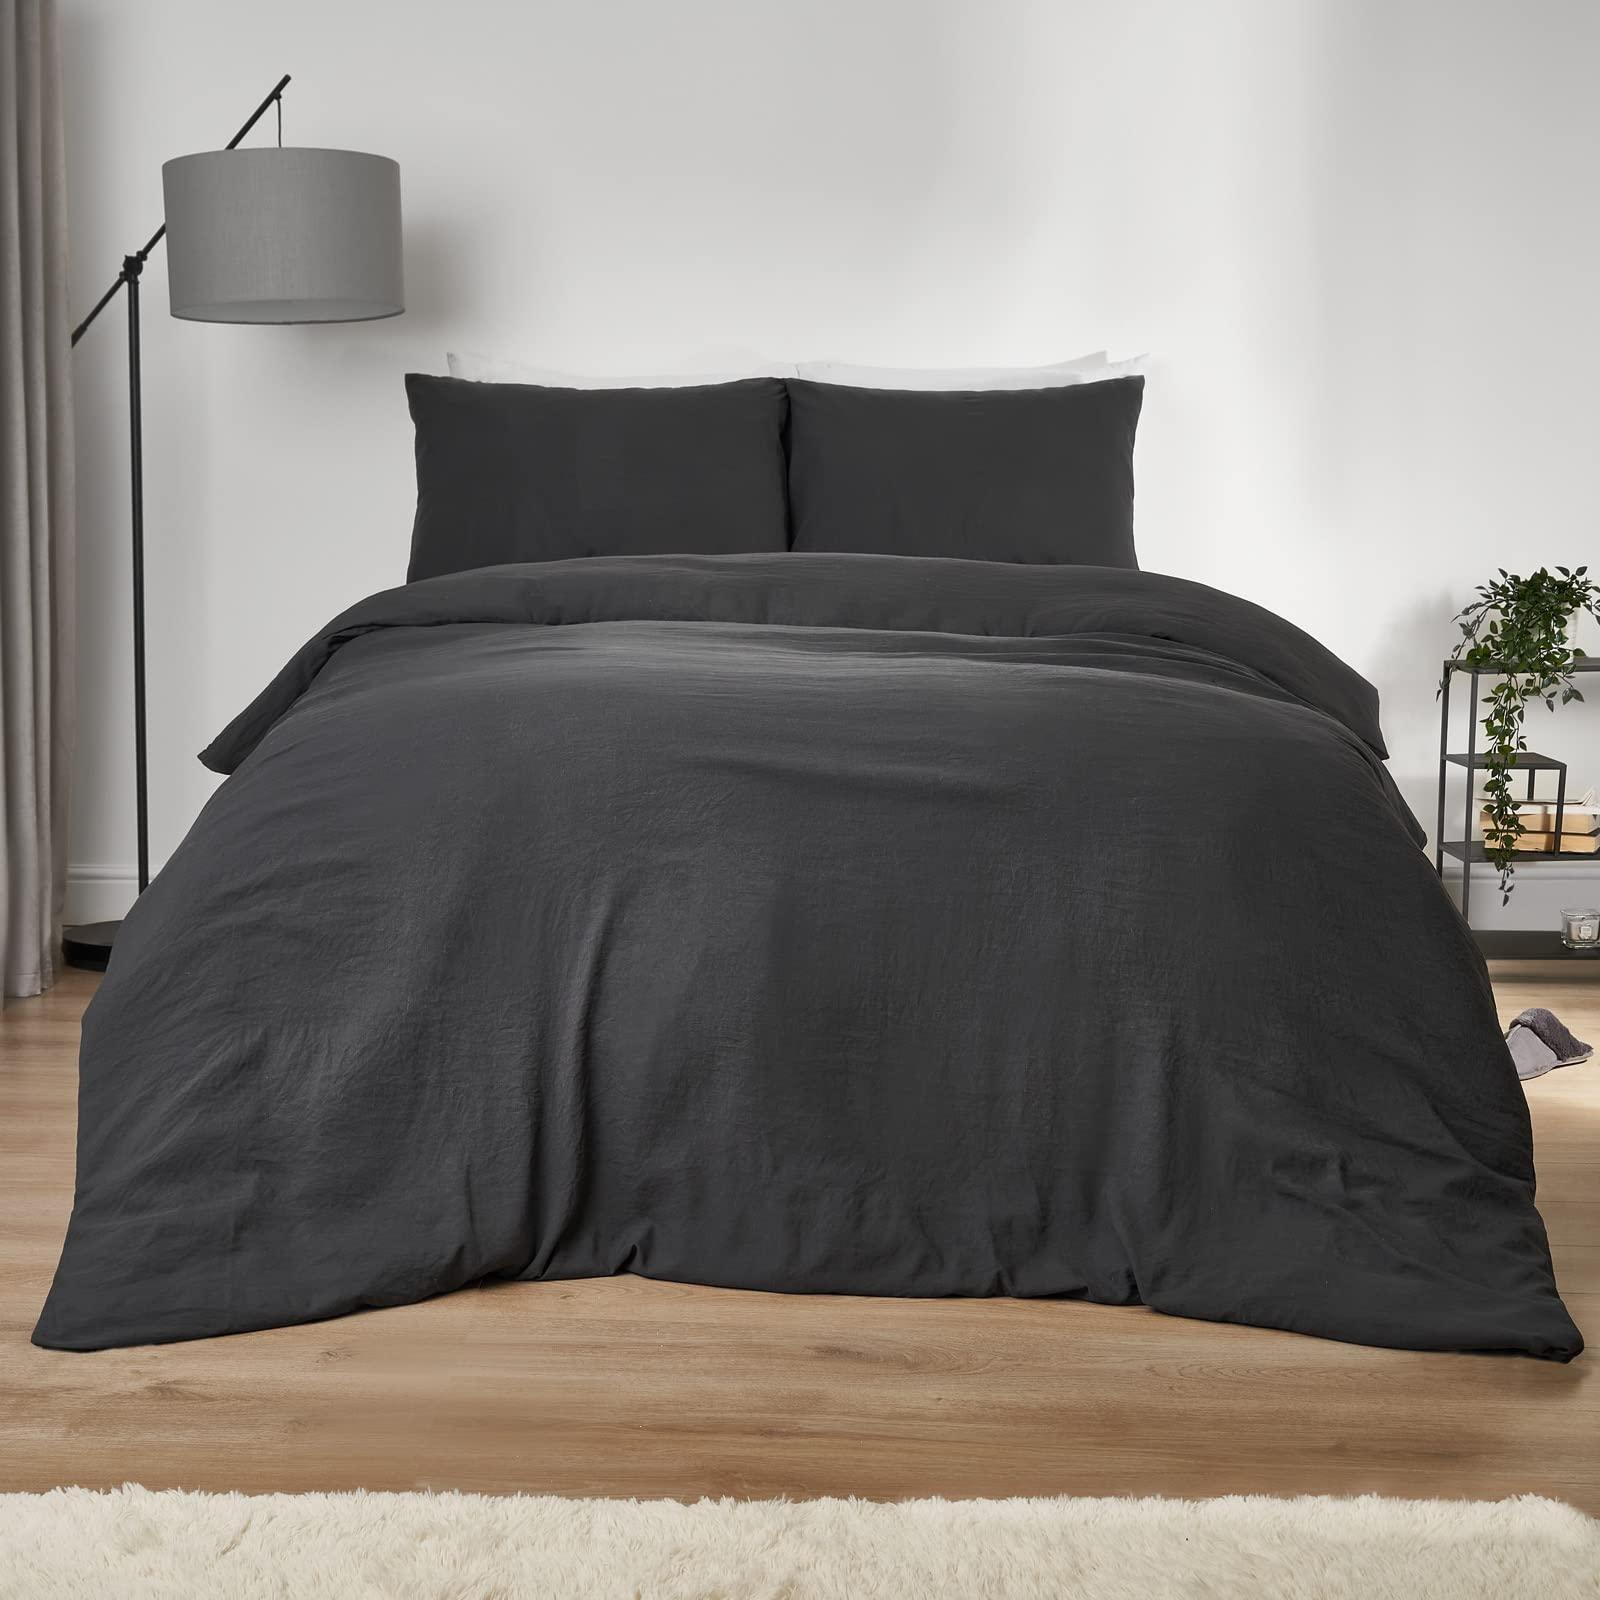 Washed Linen Duvet Cover Twin with 1 Pillow Cases Super Soft Brushed Microfiber Twin Size Duvet 68 x 90 Duvet Cover Twin 2 Piece Bedding Sets Twin Duvet Cover - Loomini